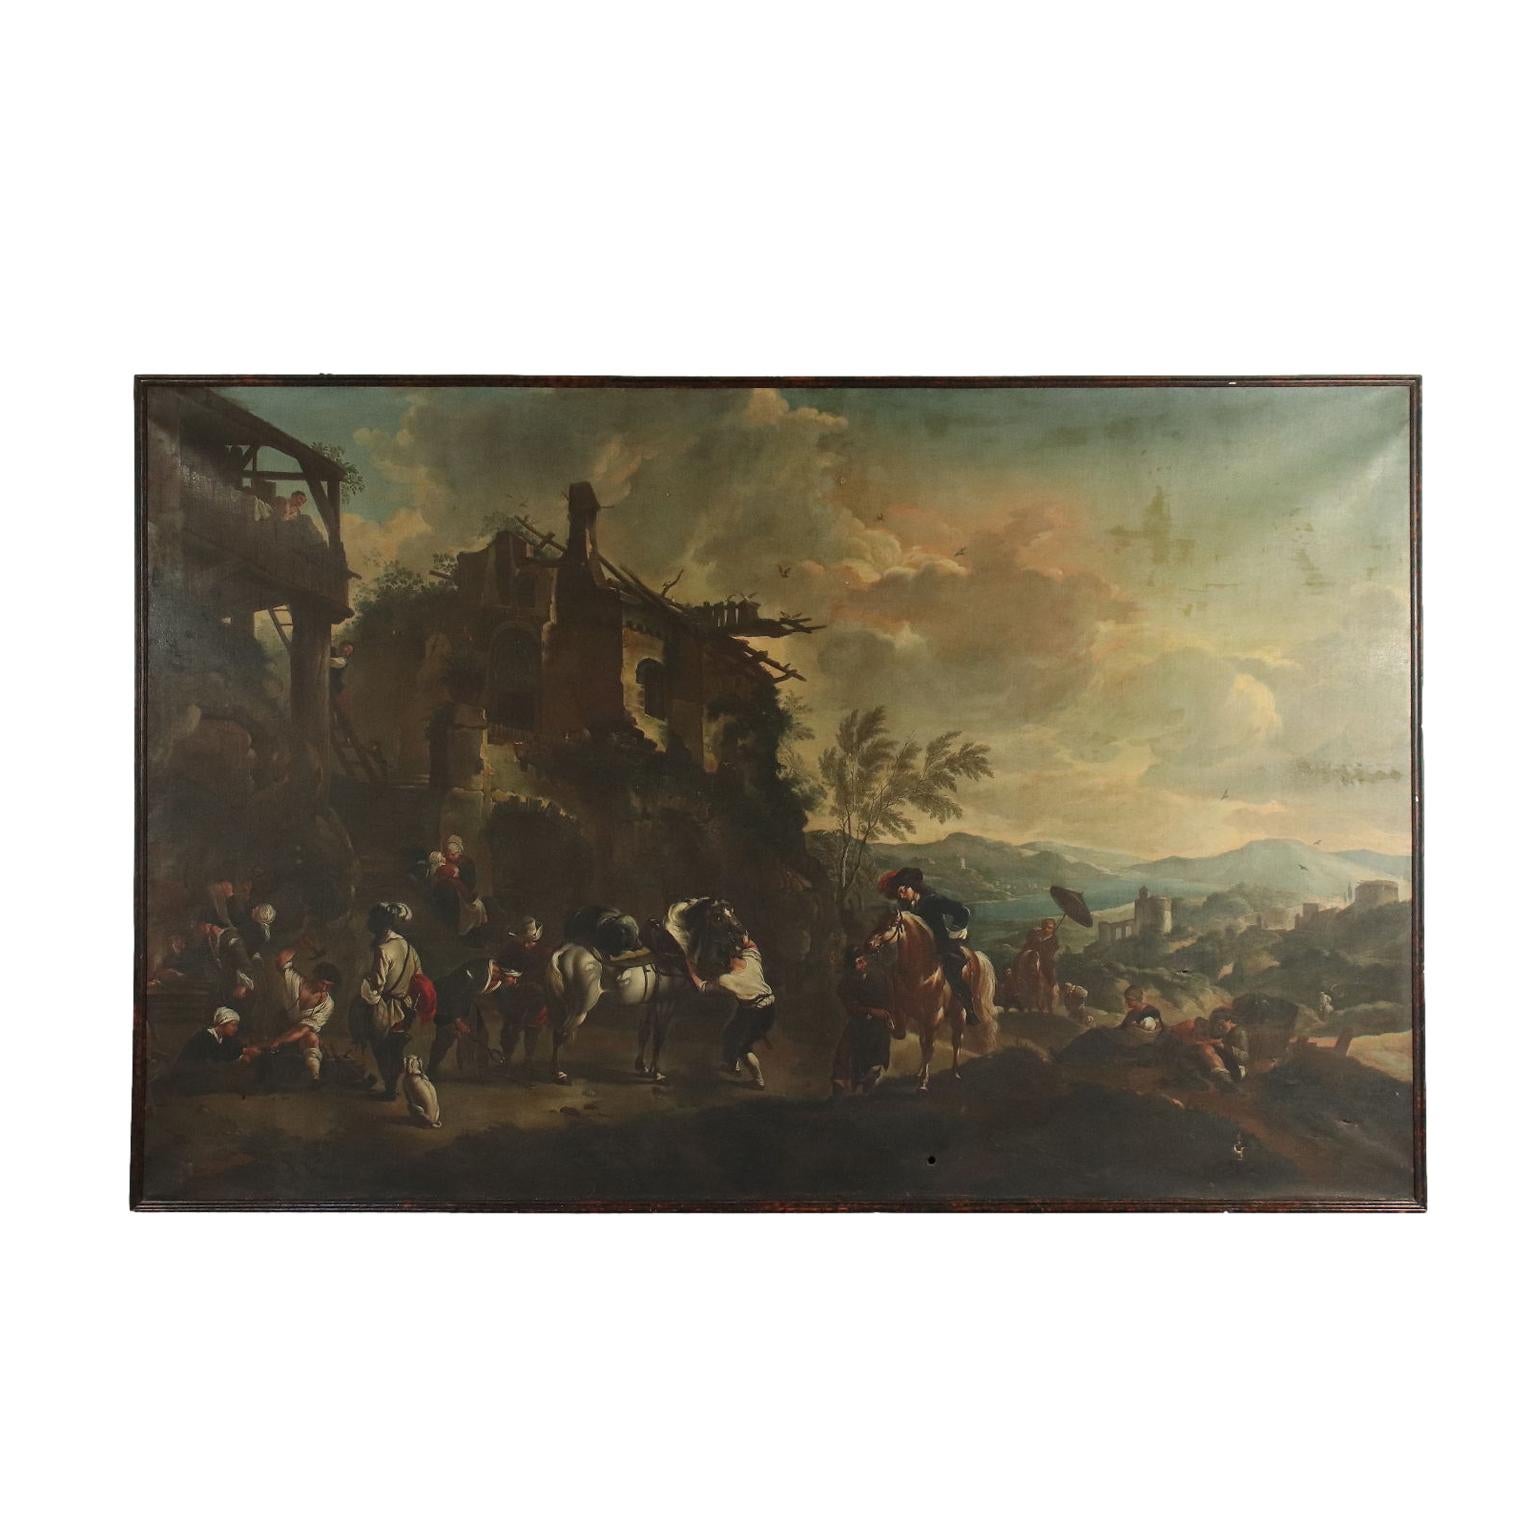 Unknown Landscape Painting - Landscape With Figures And Knights Oil On Canvas 18th Century